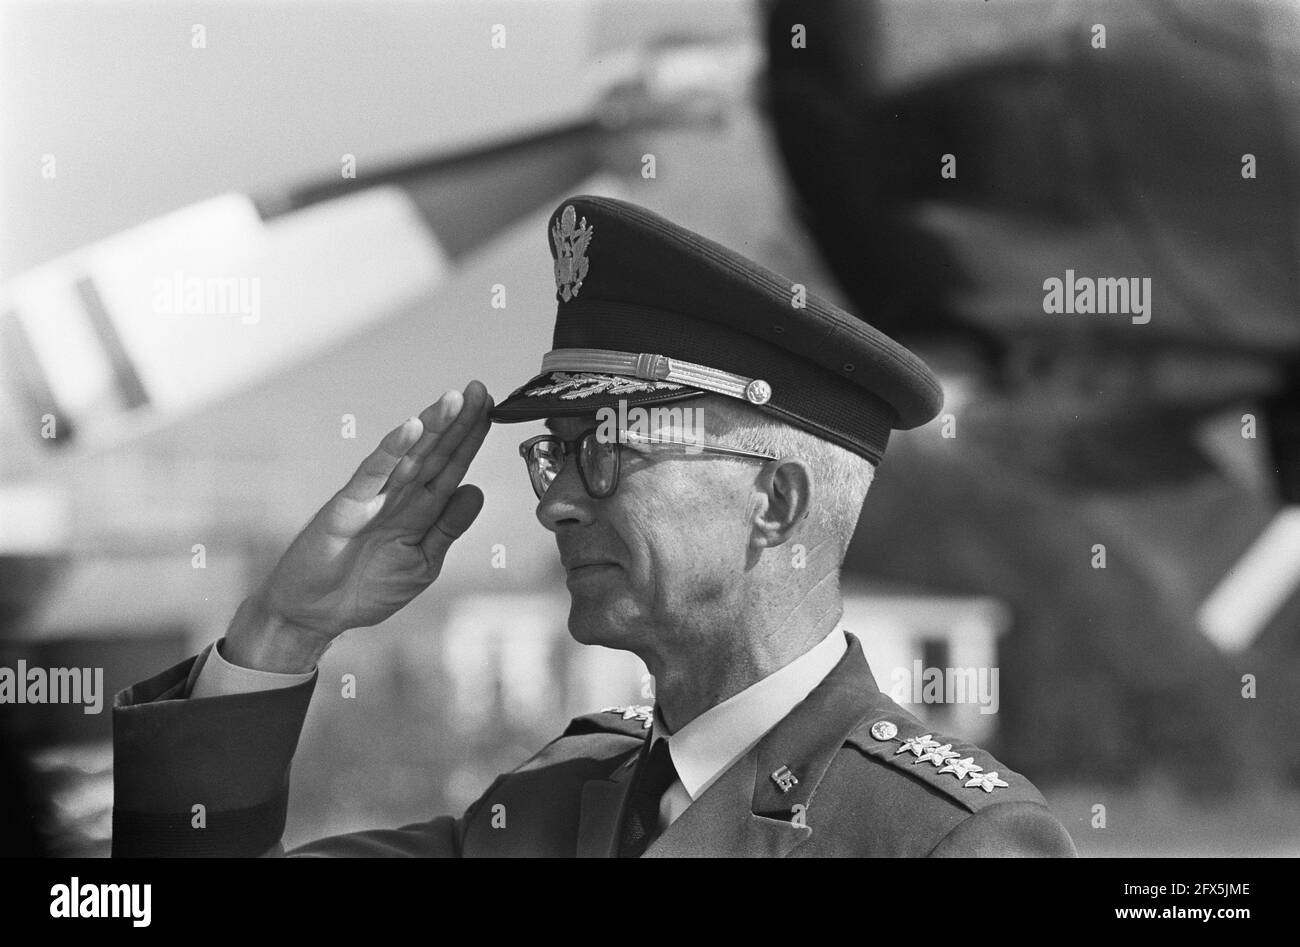 General A. J. Goodpaster, commander-in-chief of the allied forces in Europe, arrives at Ypenburg: General Goodpaster, headline, September 8, 1969, generals, commanders-in-chief, The Netherlands, 20th century press agency photo, news to remember, documentary, historic photography 1945-1990, visual stories, human history of the Twentieth Century, capturing moments in time Stock Photo